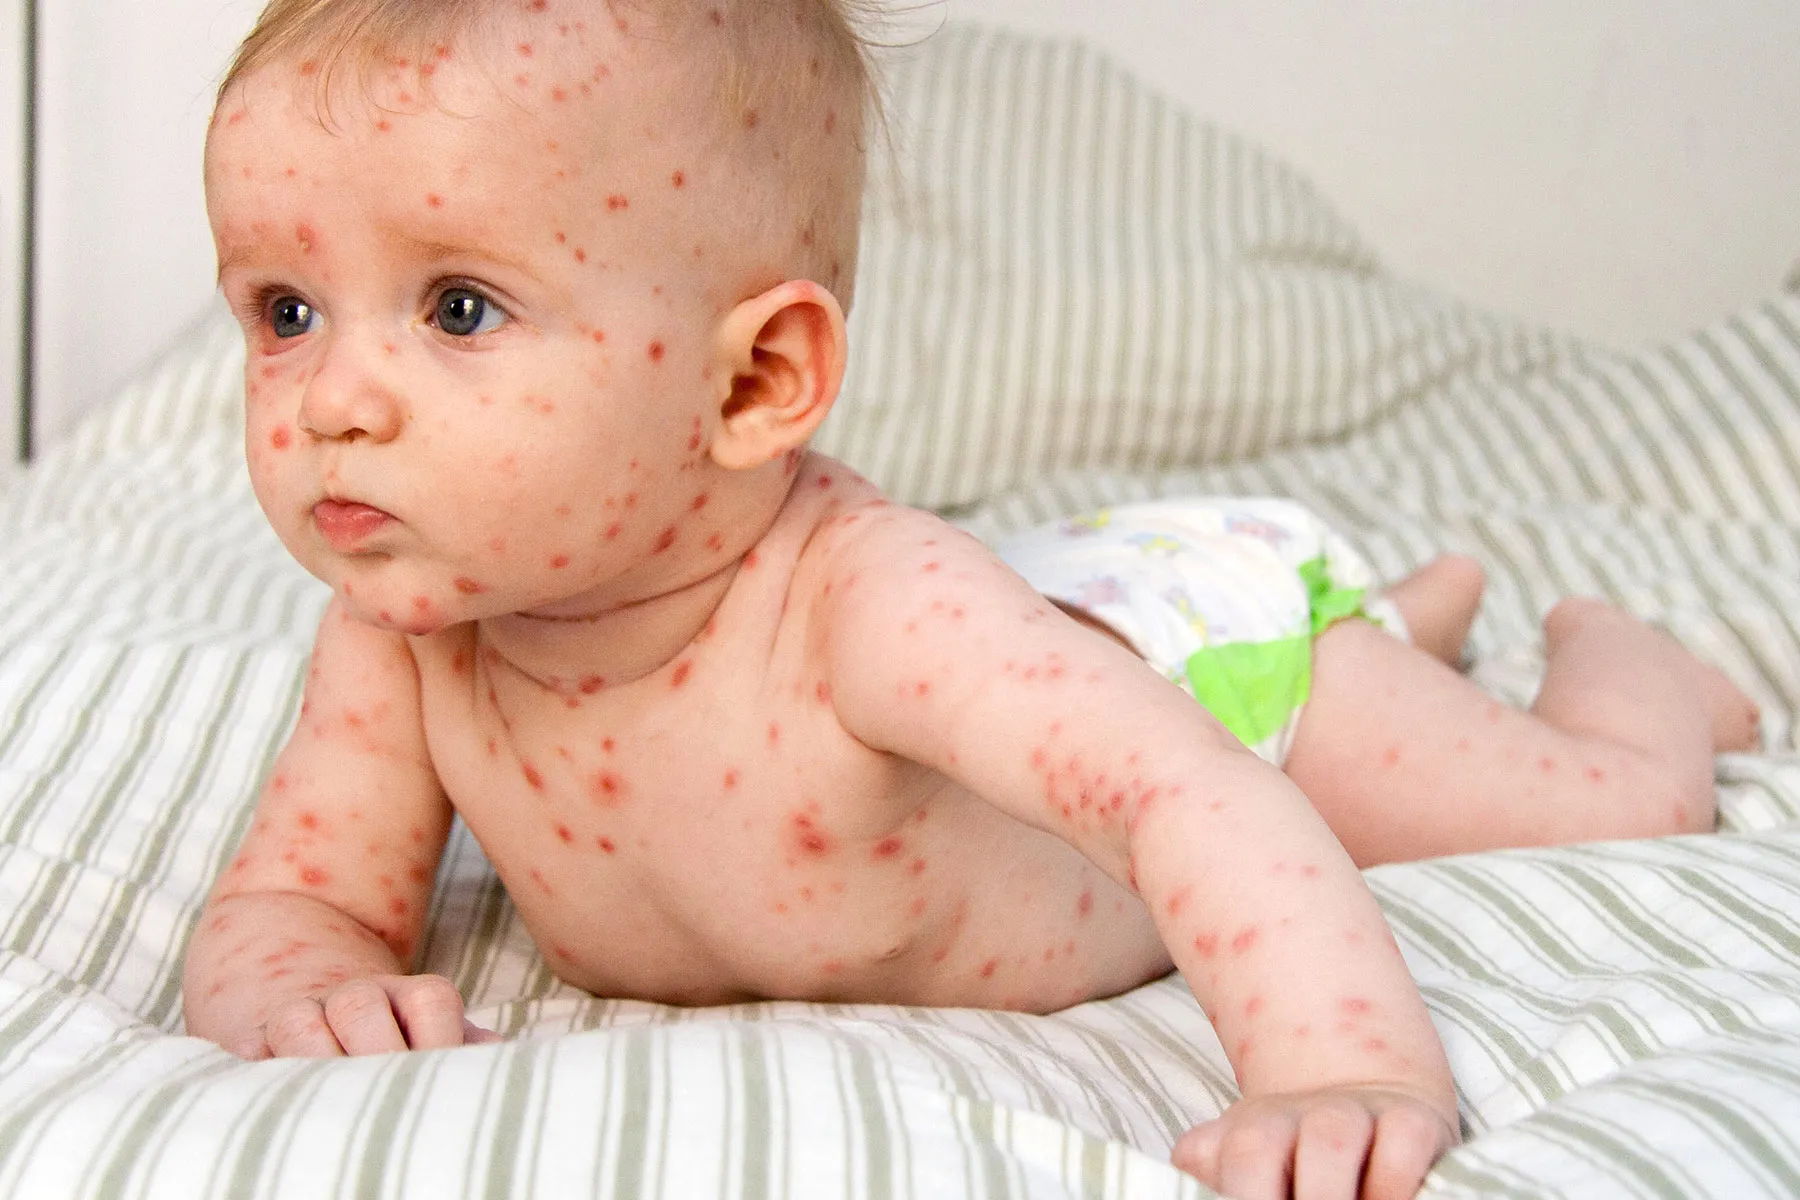 Pictures of Viral Rashes in Adults & Children